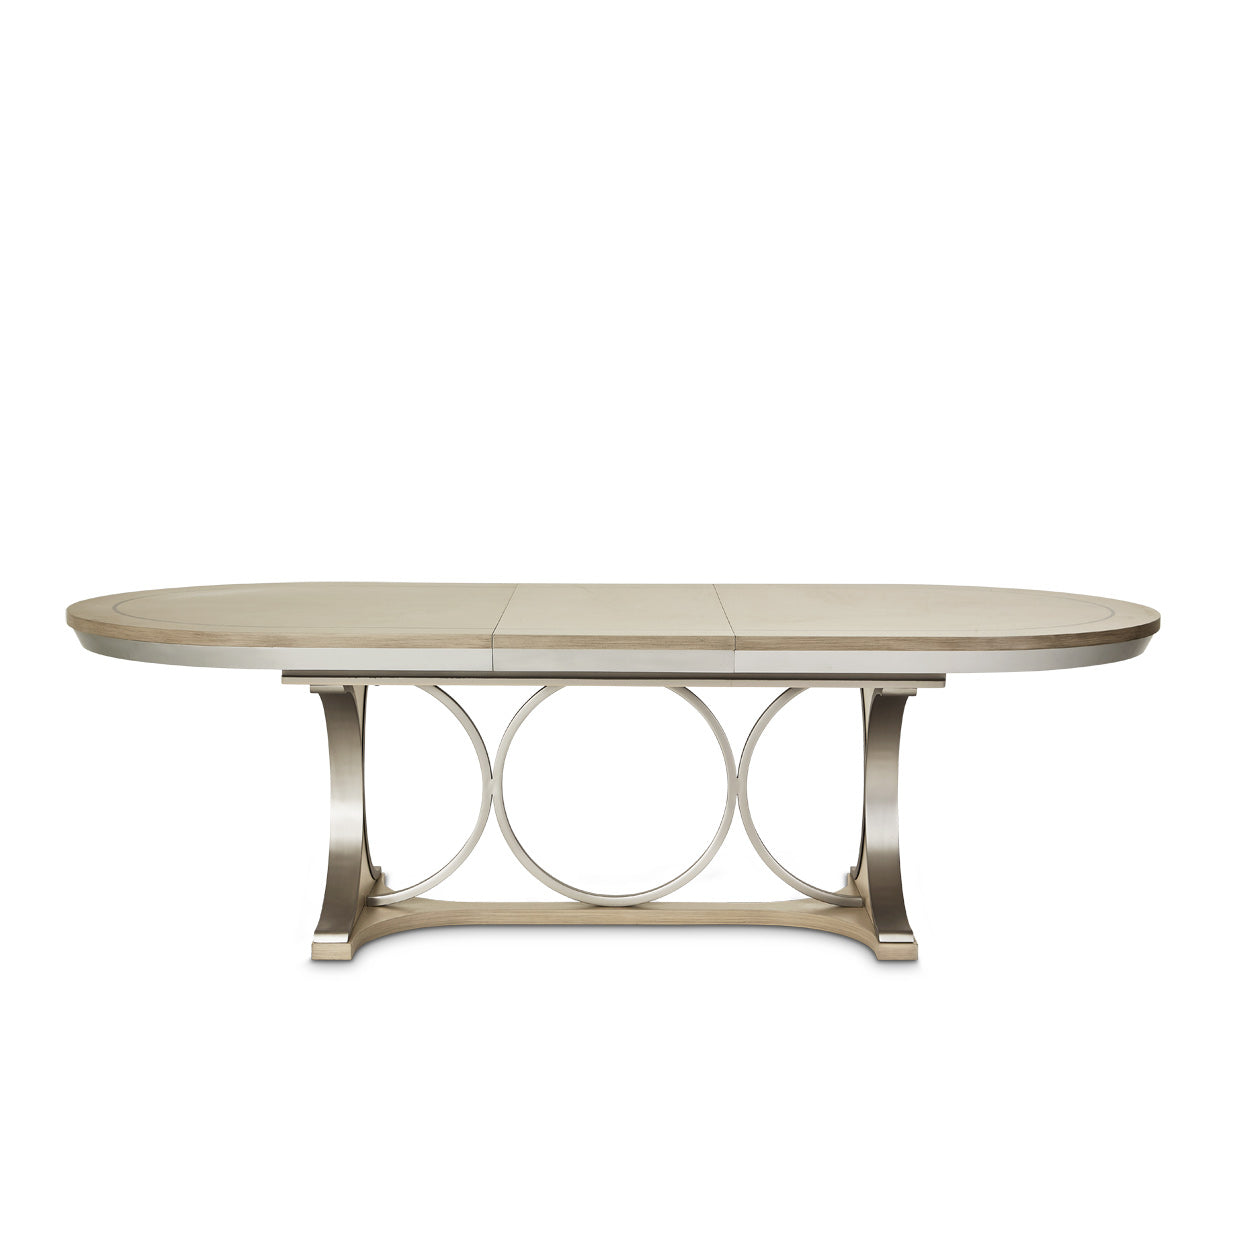 ECLIPSE Oval Dining Table - Dream art Gallery